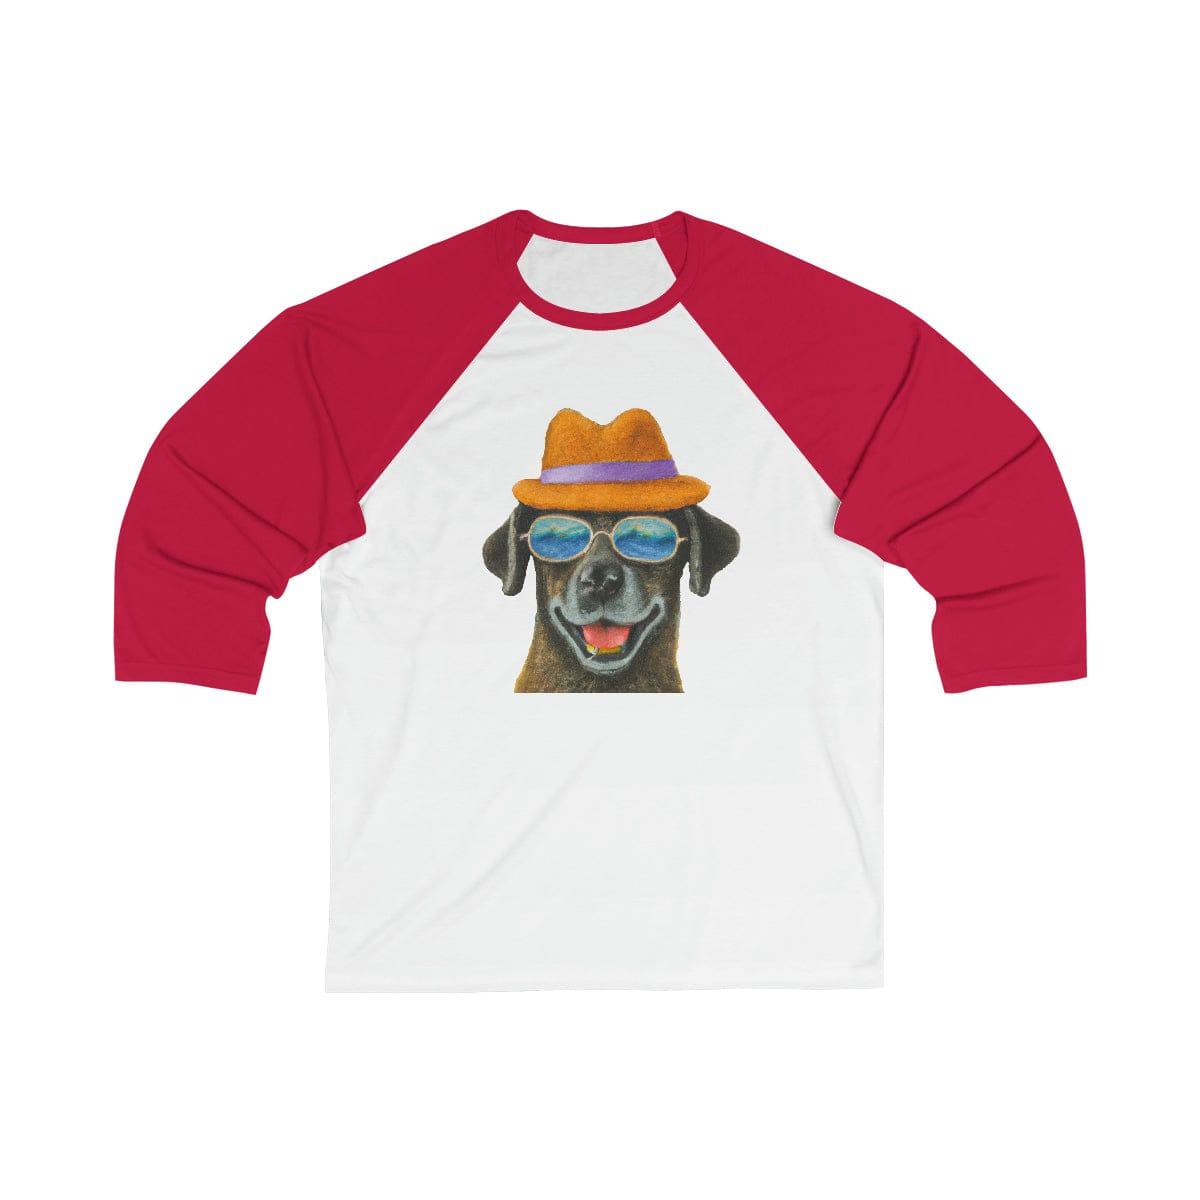 Dog at the beach wearing a hat and sunglasses arts unisex 3\4 Sleeve Baseball Tee for women